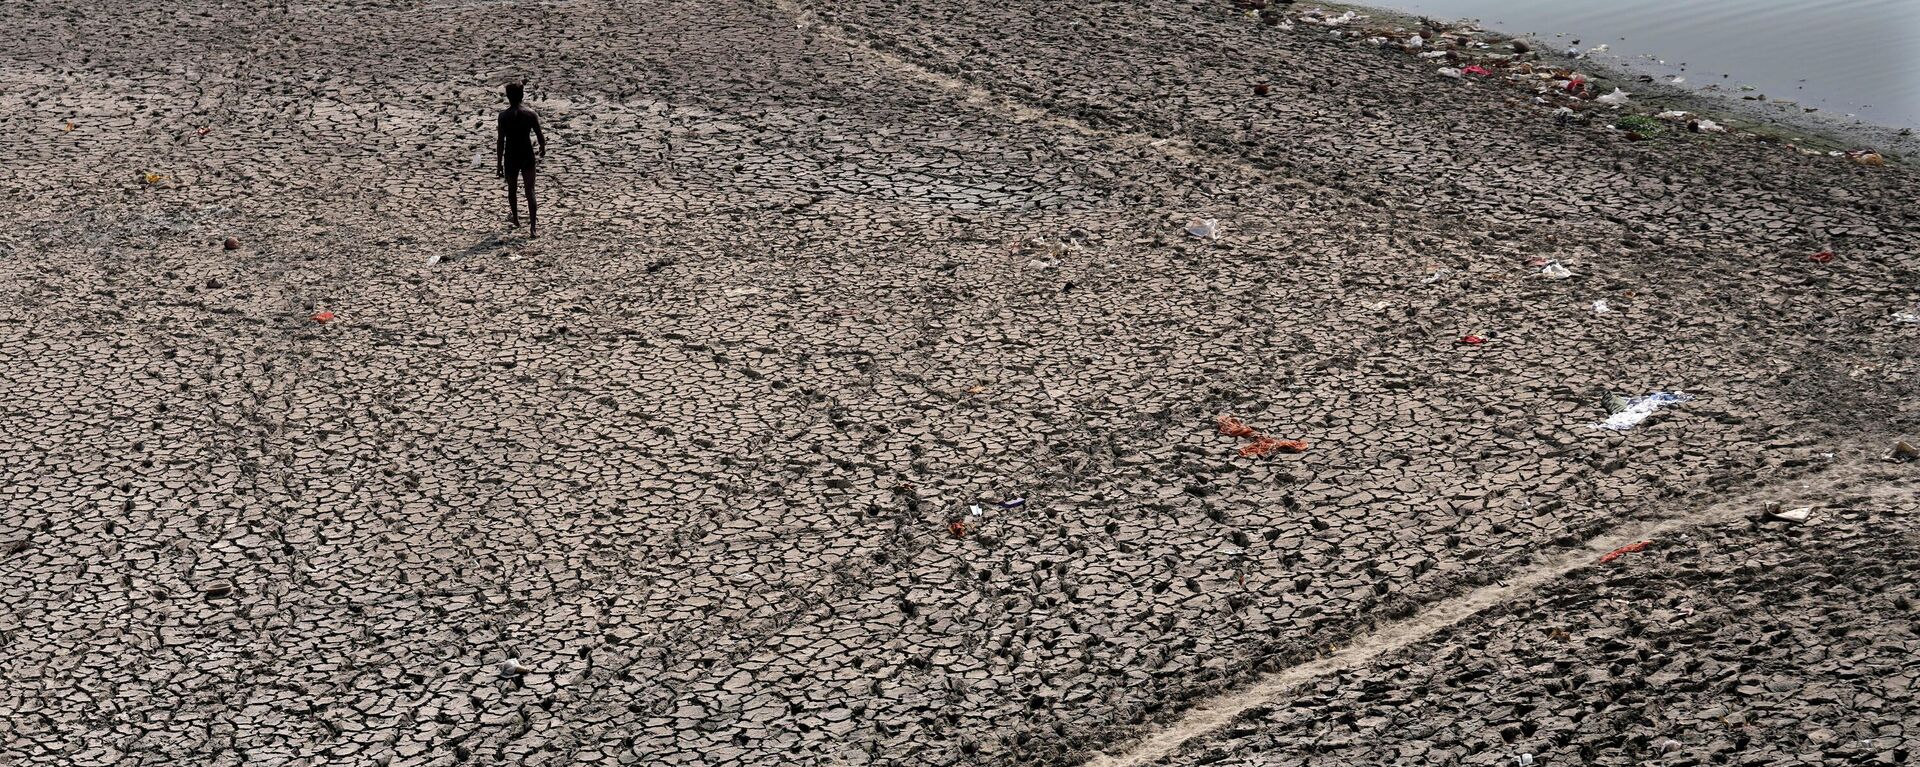 A man walks across a dried bed of river Yamuna where water levels have reduced drastically following hot weather in New Delhi, India, Monday, May 2, 2022. - Sputnik International, 1920, 21.10.2022